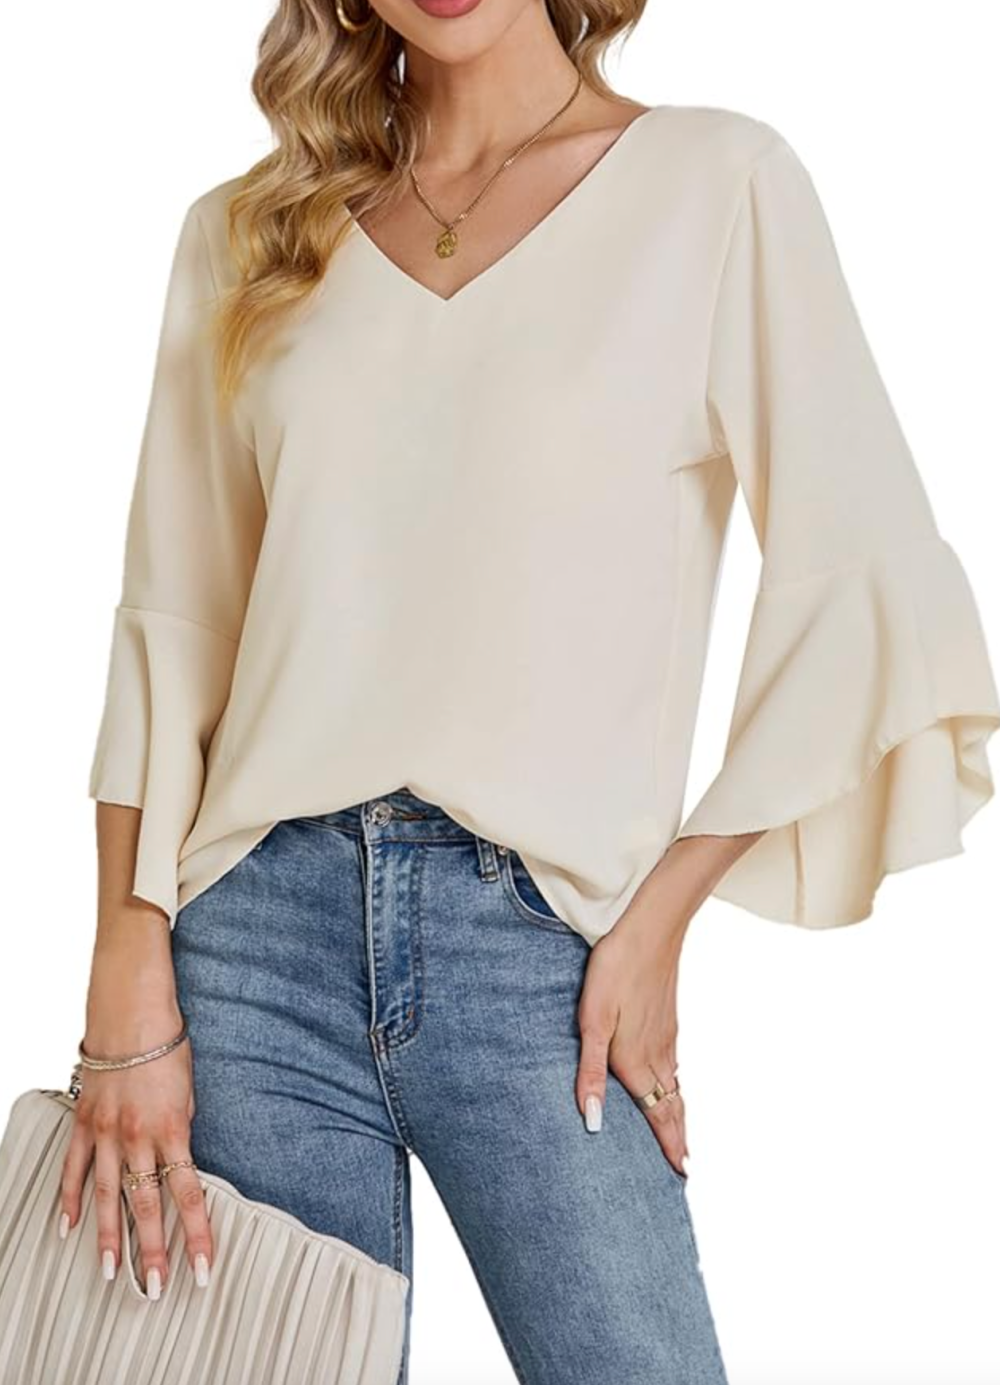 LYANER casual women's blouse with V-neck, ruffles and bell sleeves